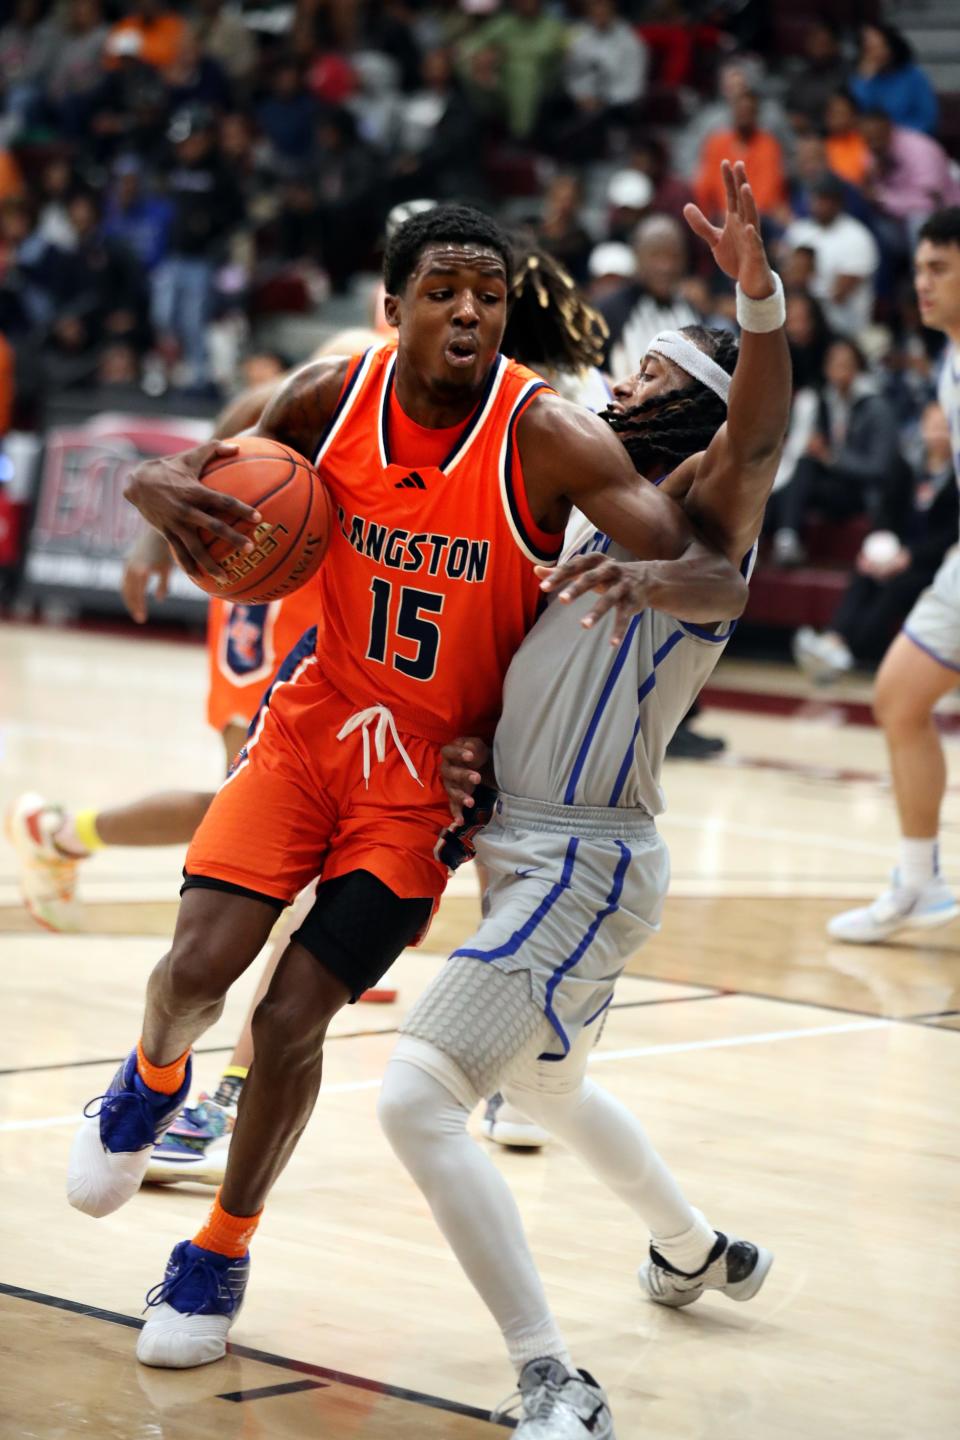 Langston's Cortez Mosley tries to get around OCU's Dravon Clayborn during a men's college basketball game last year in Oklahoma City.